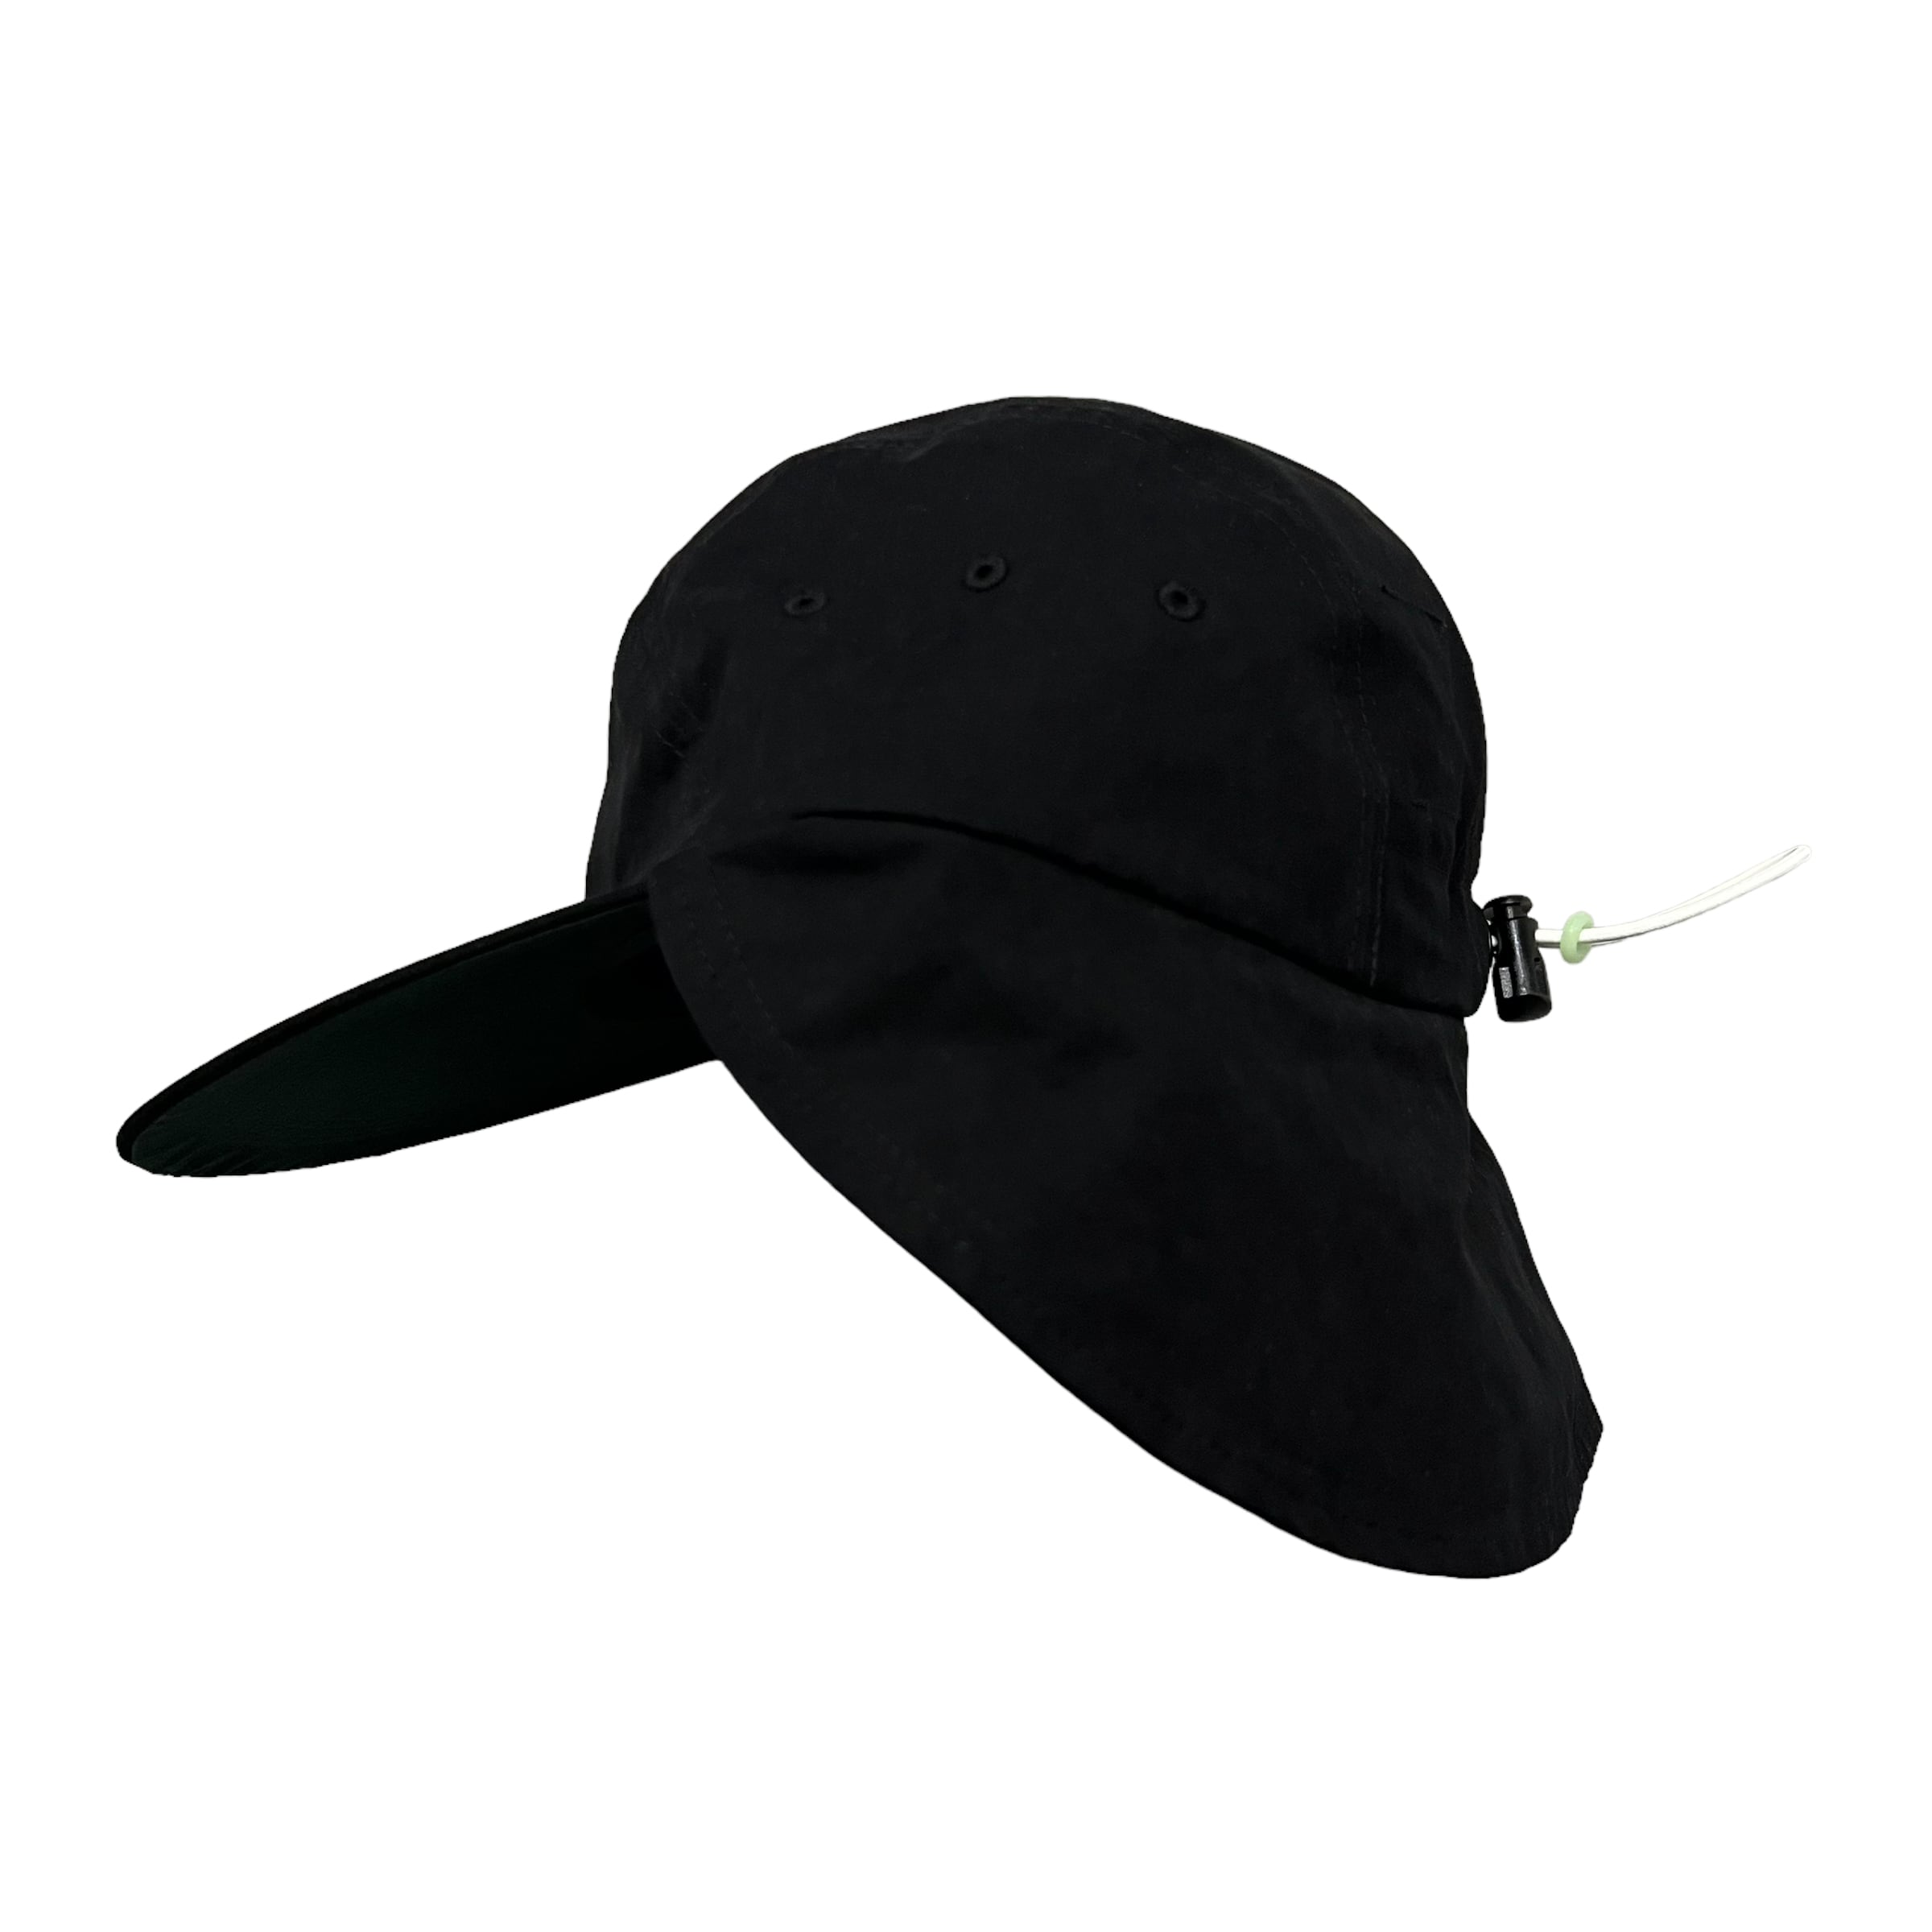 NOROLL / AWNING CAP BLACK | THE NEWAGE CLUB powered by BASE